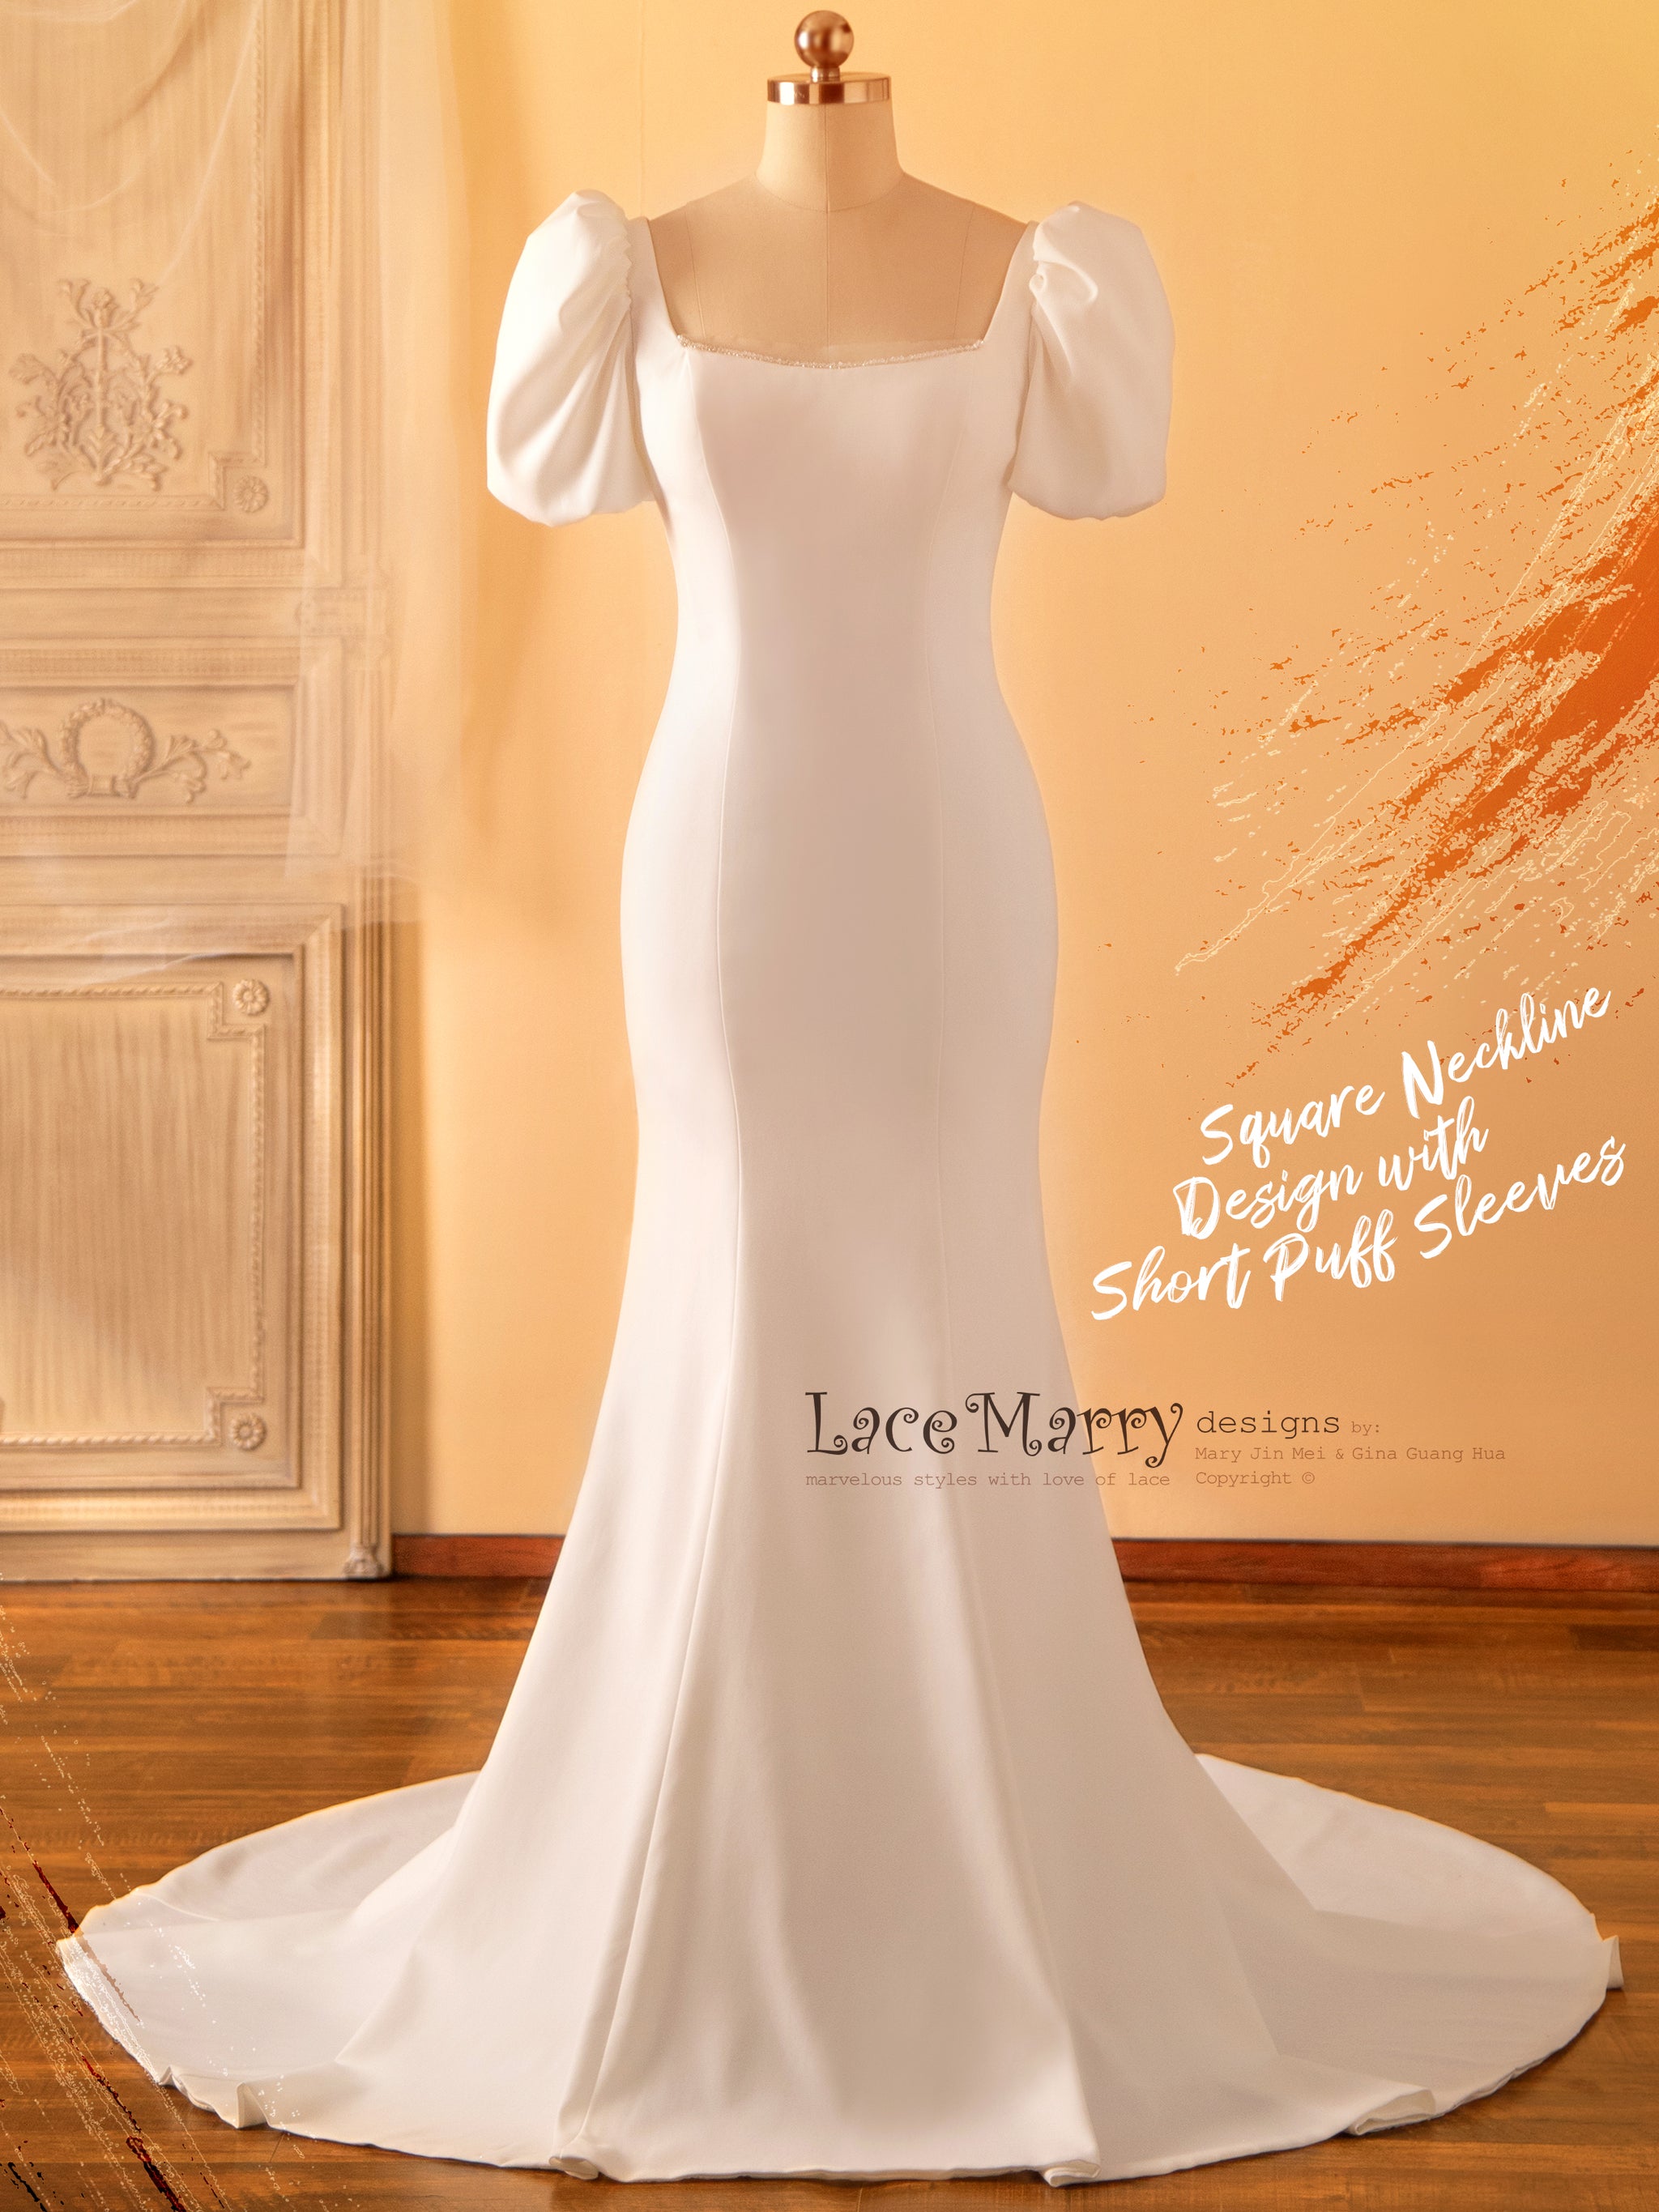 MADIA / Square Neckline Wedding Dress with Short Puff Sleeves - LaceMarry